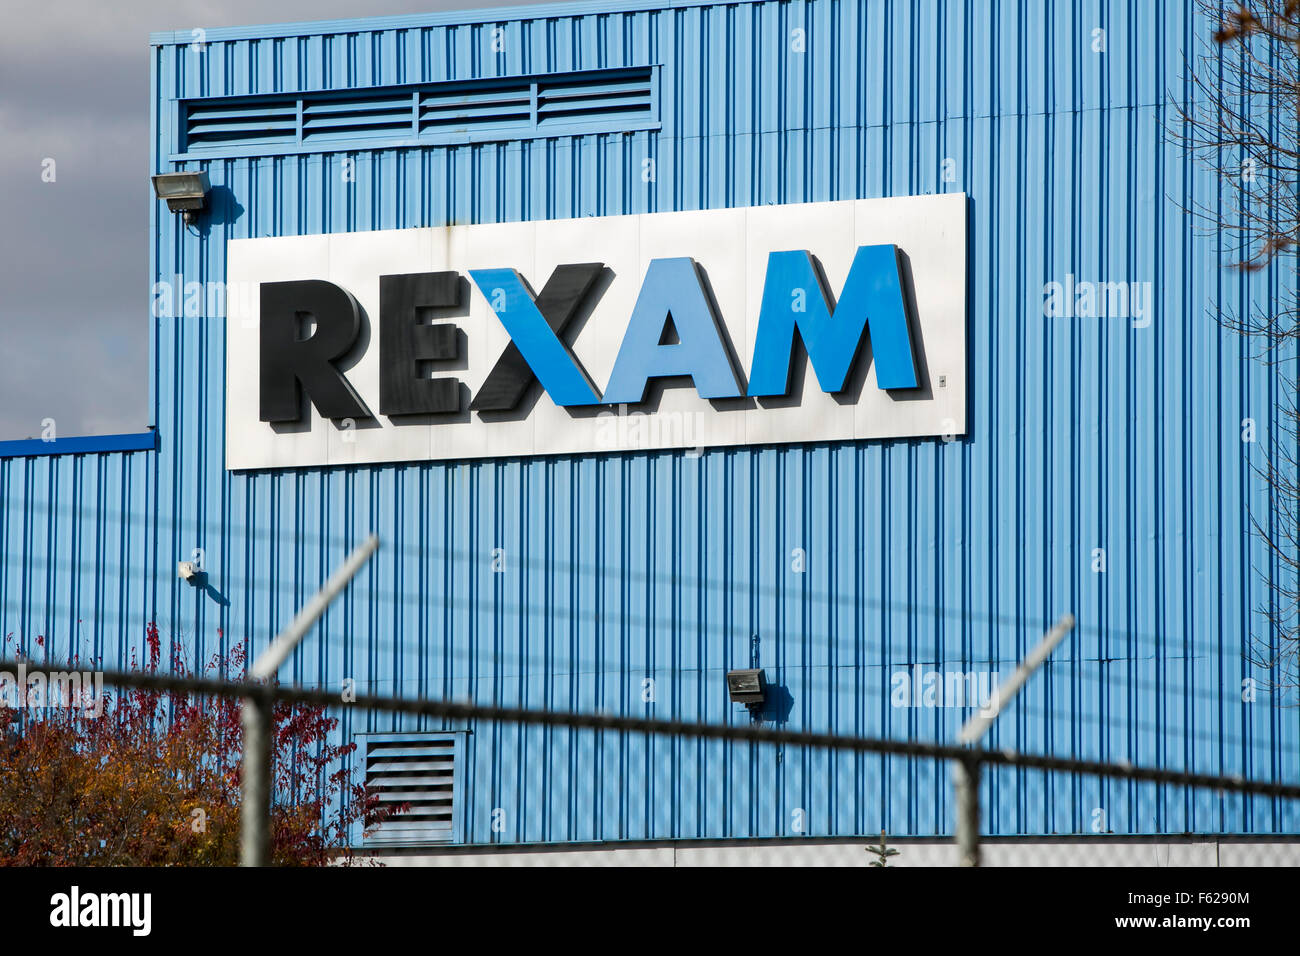 A logo sign outside of a facility occupied by Rexam Beverage Can in St. Paul, Minnesota on October 24, 2015. Stock Photo